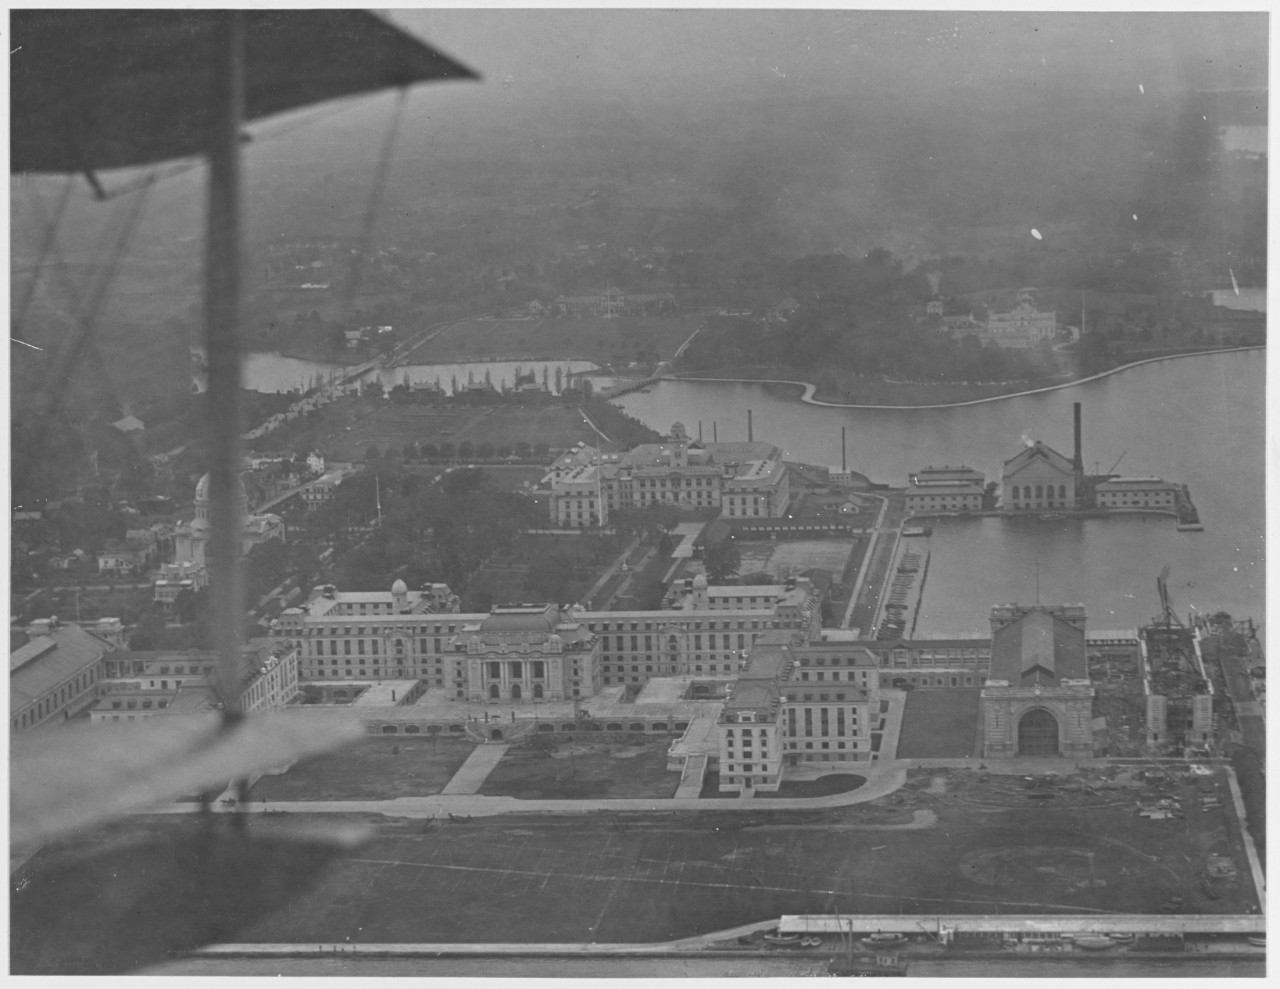 Aerial view of the Naval Academy, Annapolis, Maryland. June 22, 1921